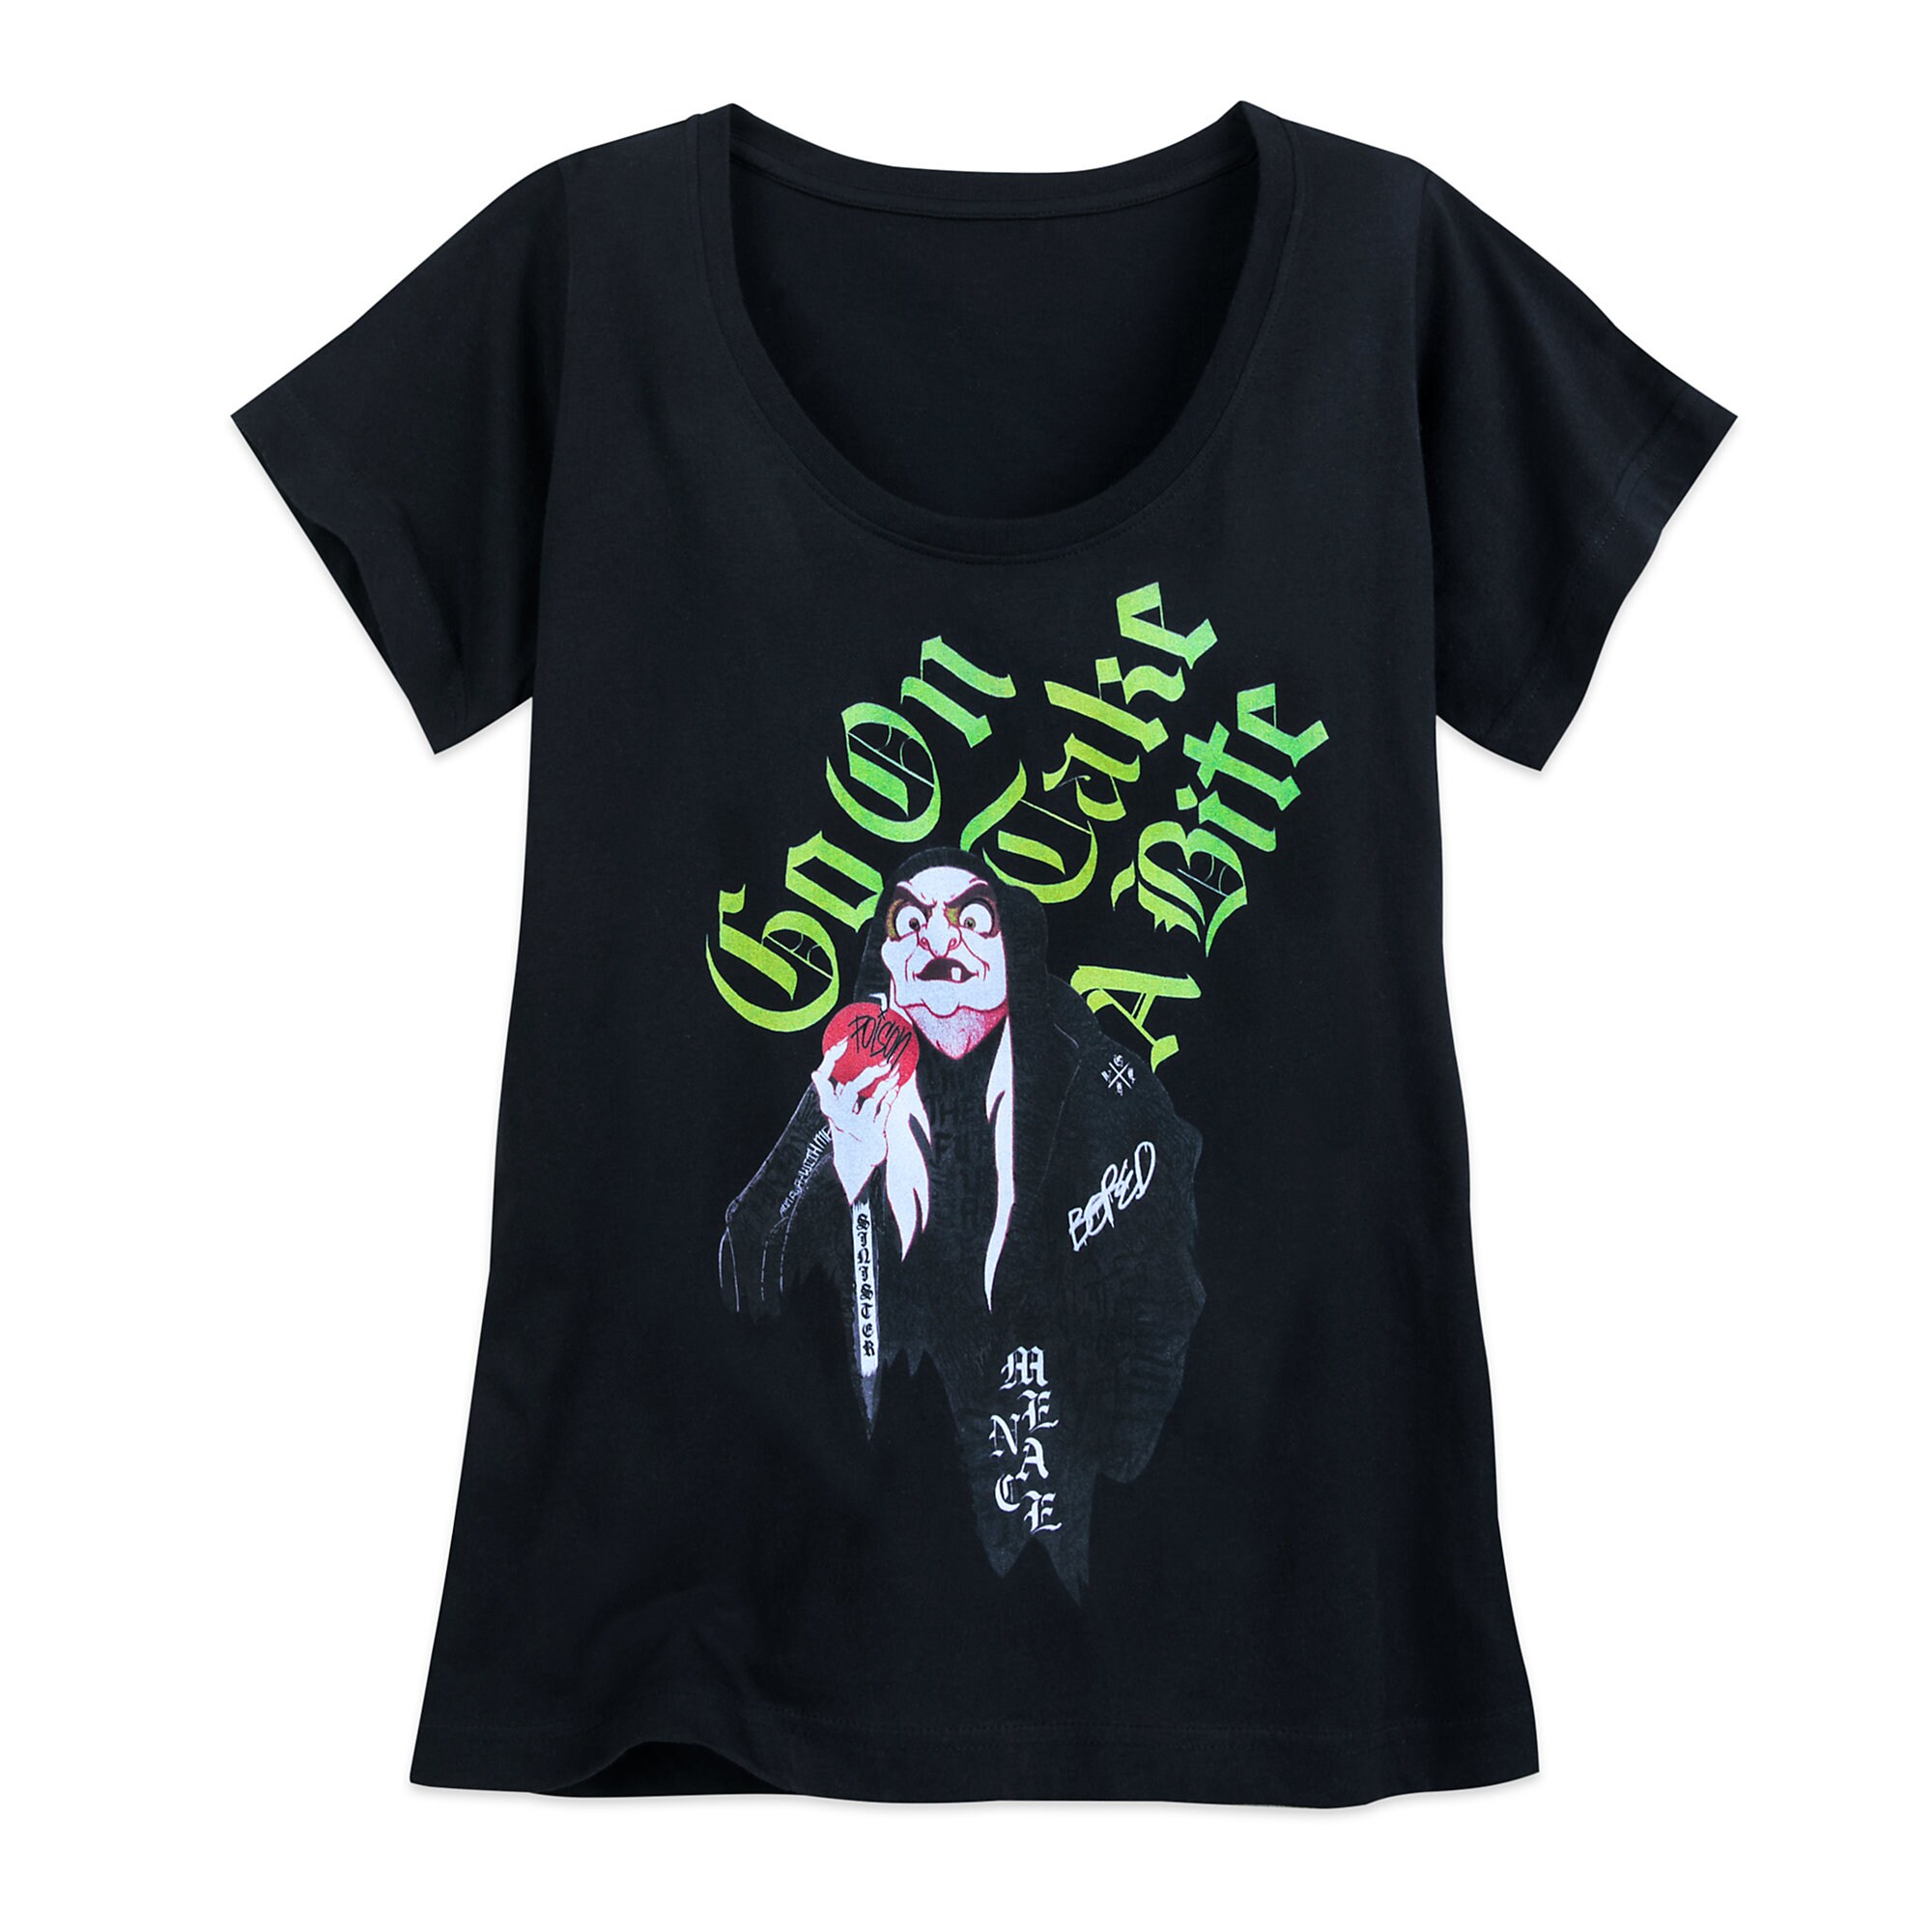 Evil Queen as Hag T-Shirt for Women - Snow White and the Seven Dwarfs